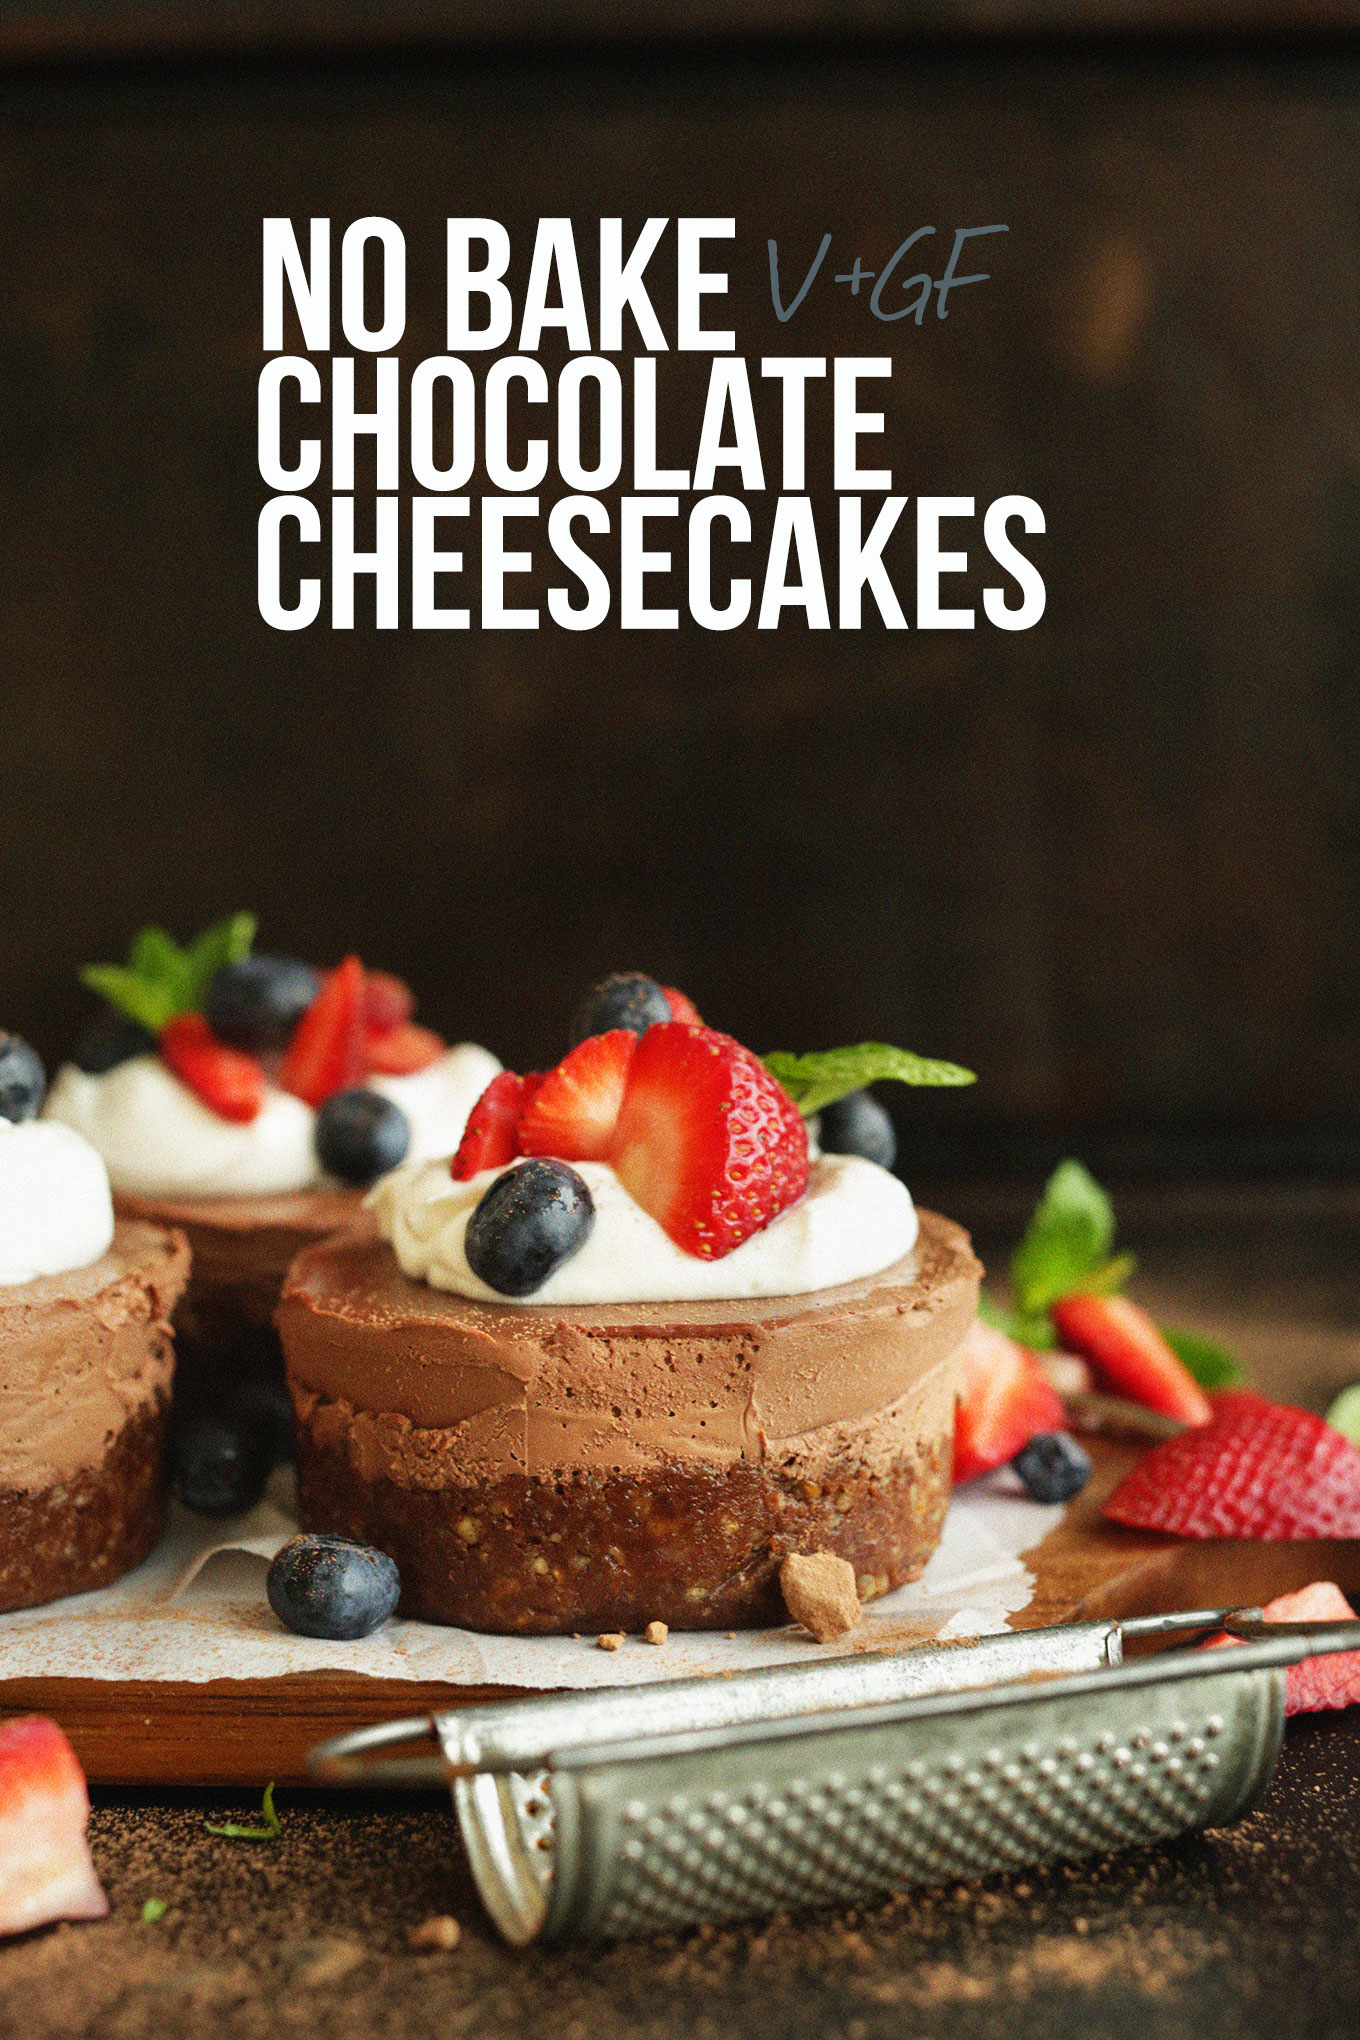 Cutting board filled with our gluten-free vegan No Bake Chocolate Cheesecakes